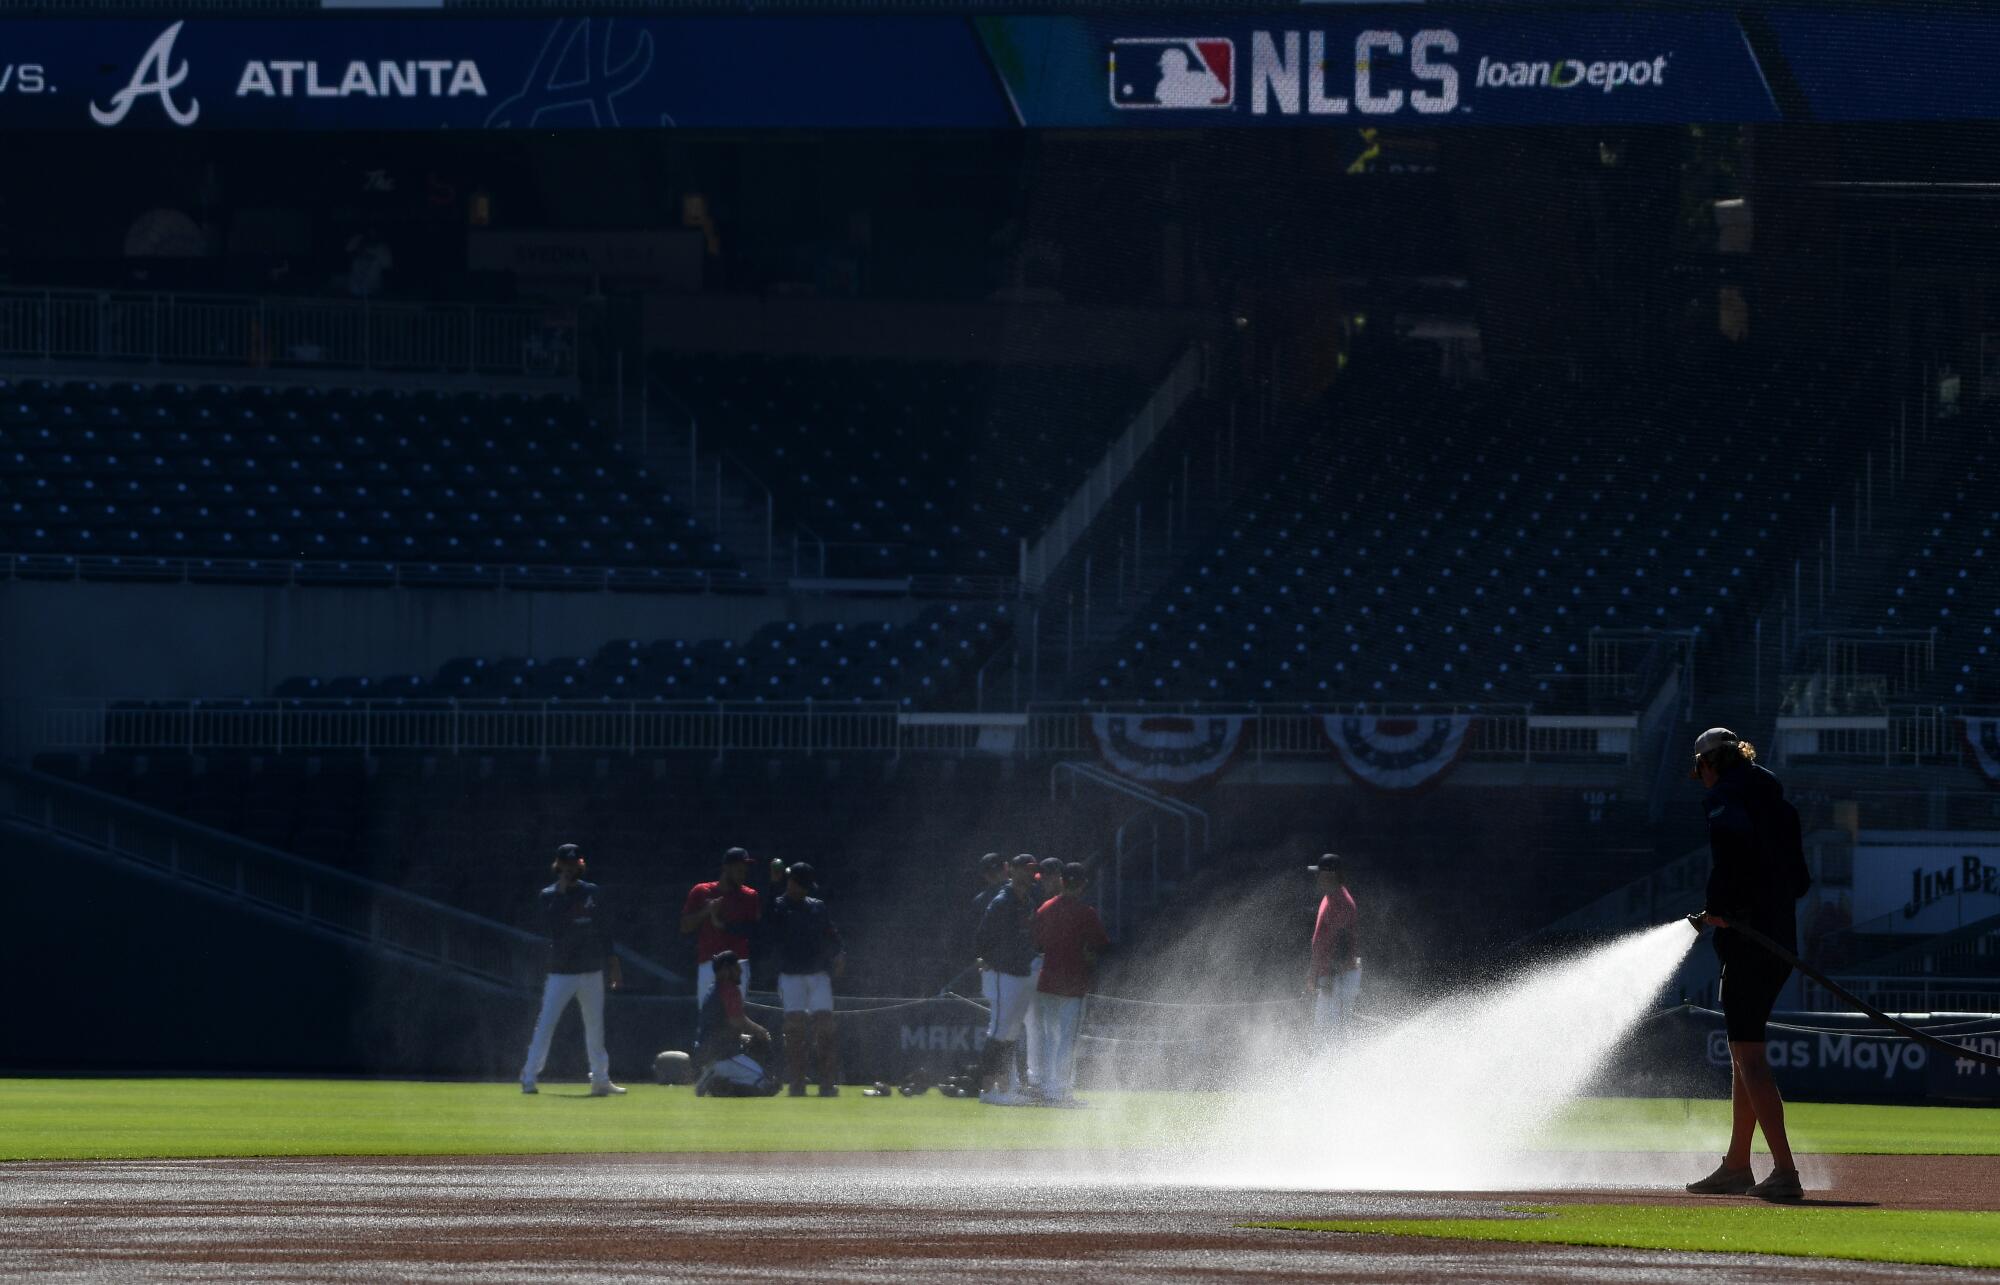 The grounds crew waters the infield before the Los Angeles Dodgers play the Atlanta Braves.